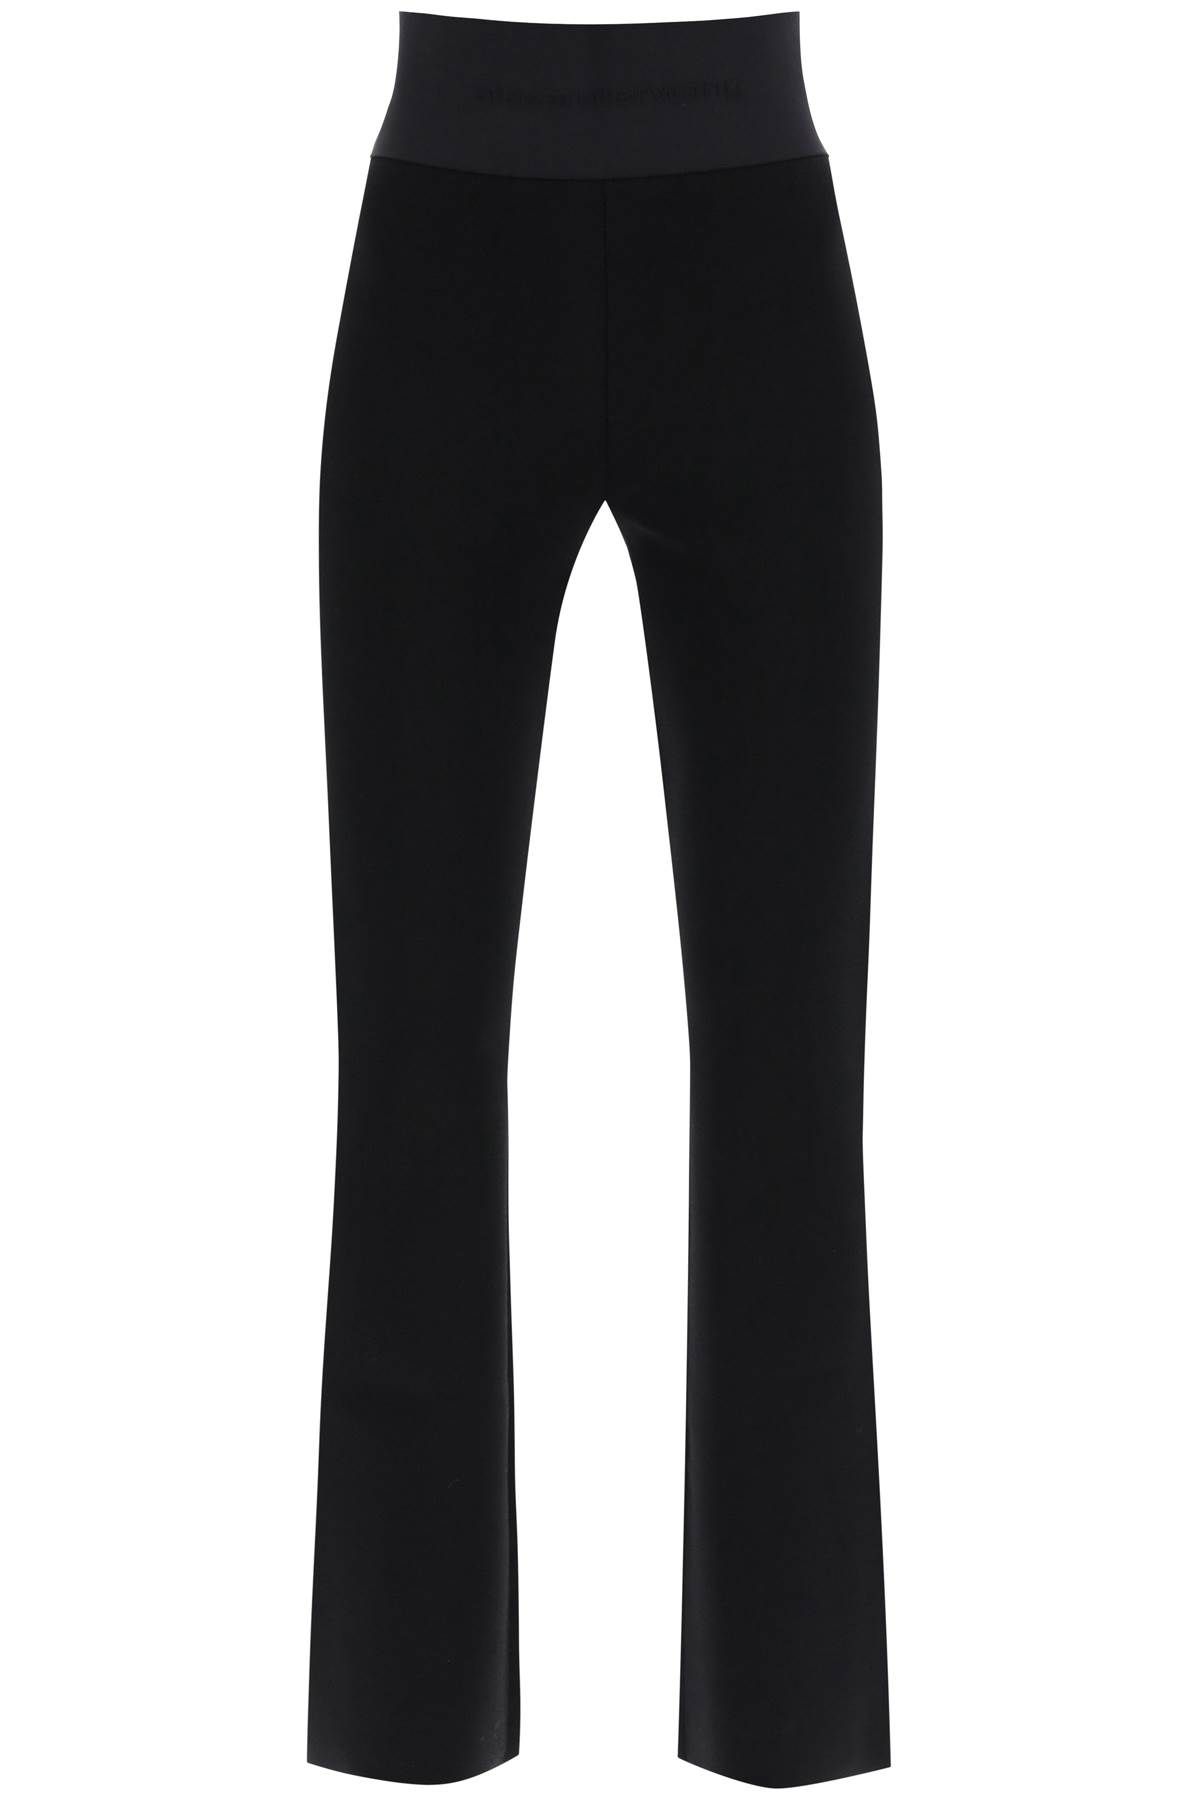 Shop Alexander Wang Flared Pants With Branded Stripe In Black